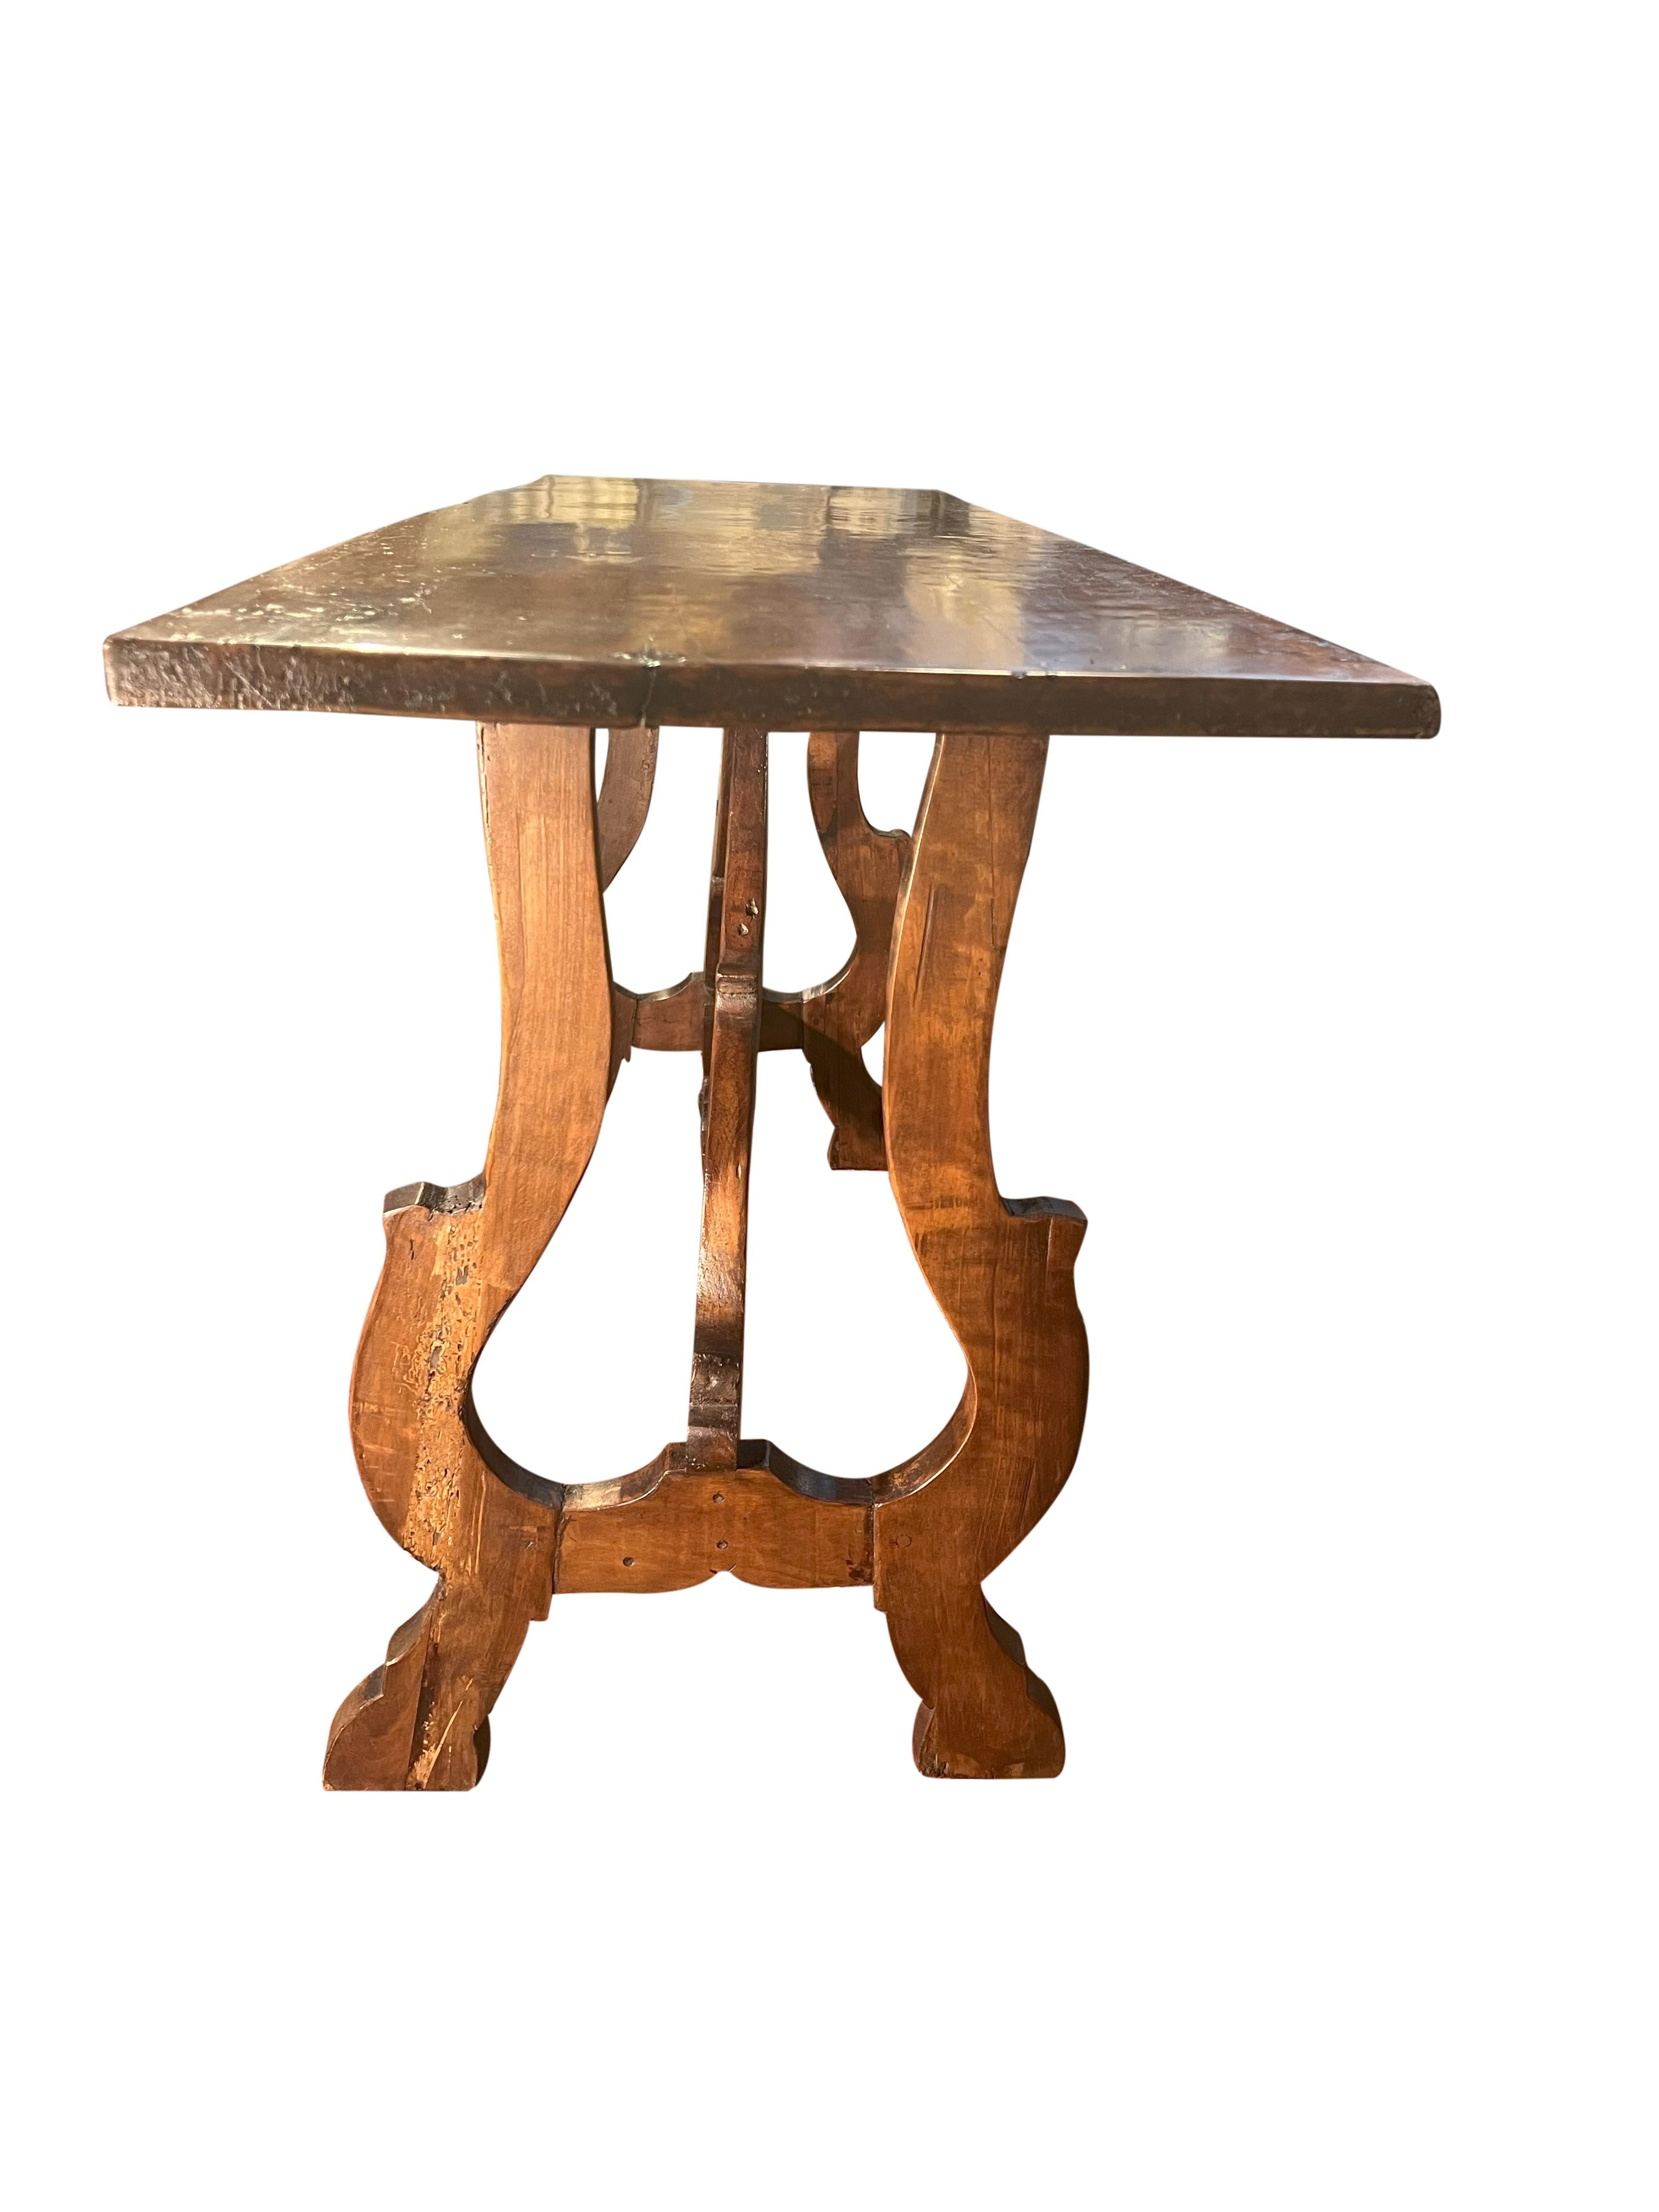  Italian 18th Century Tuscan Fratino Table with Lyre legs. For Sale 1